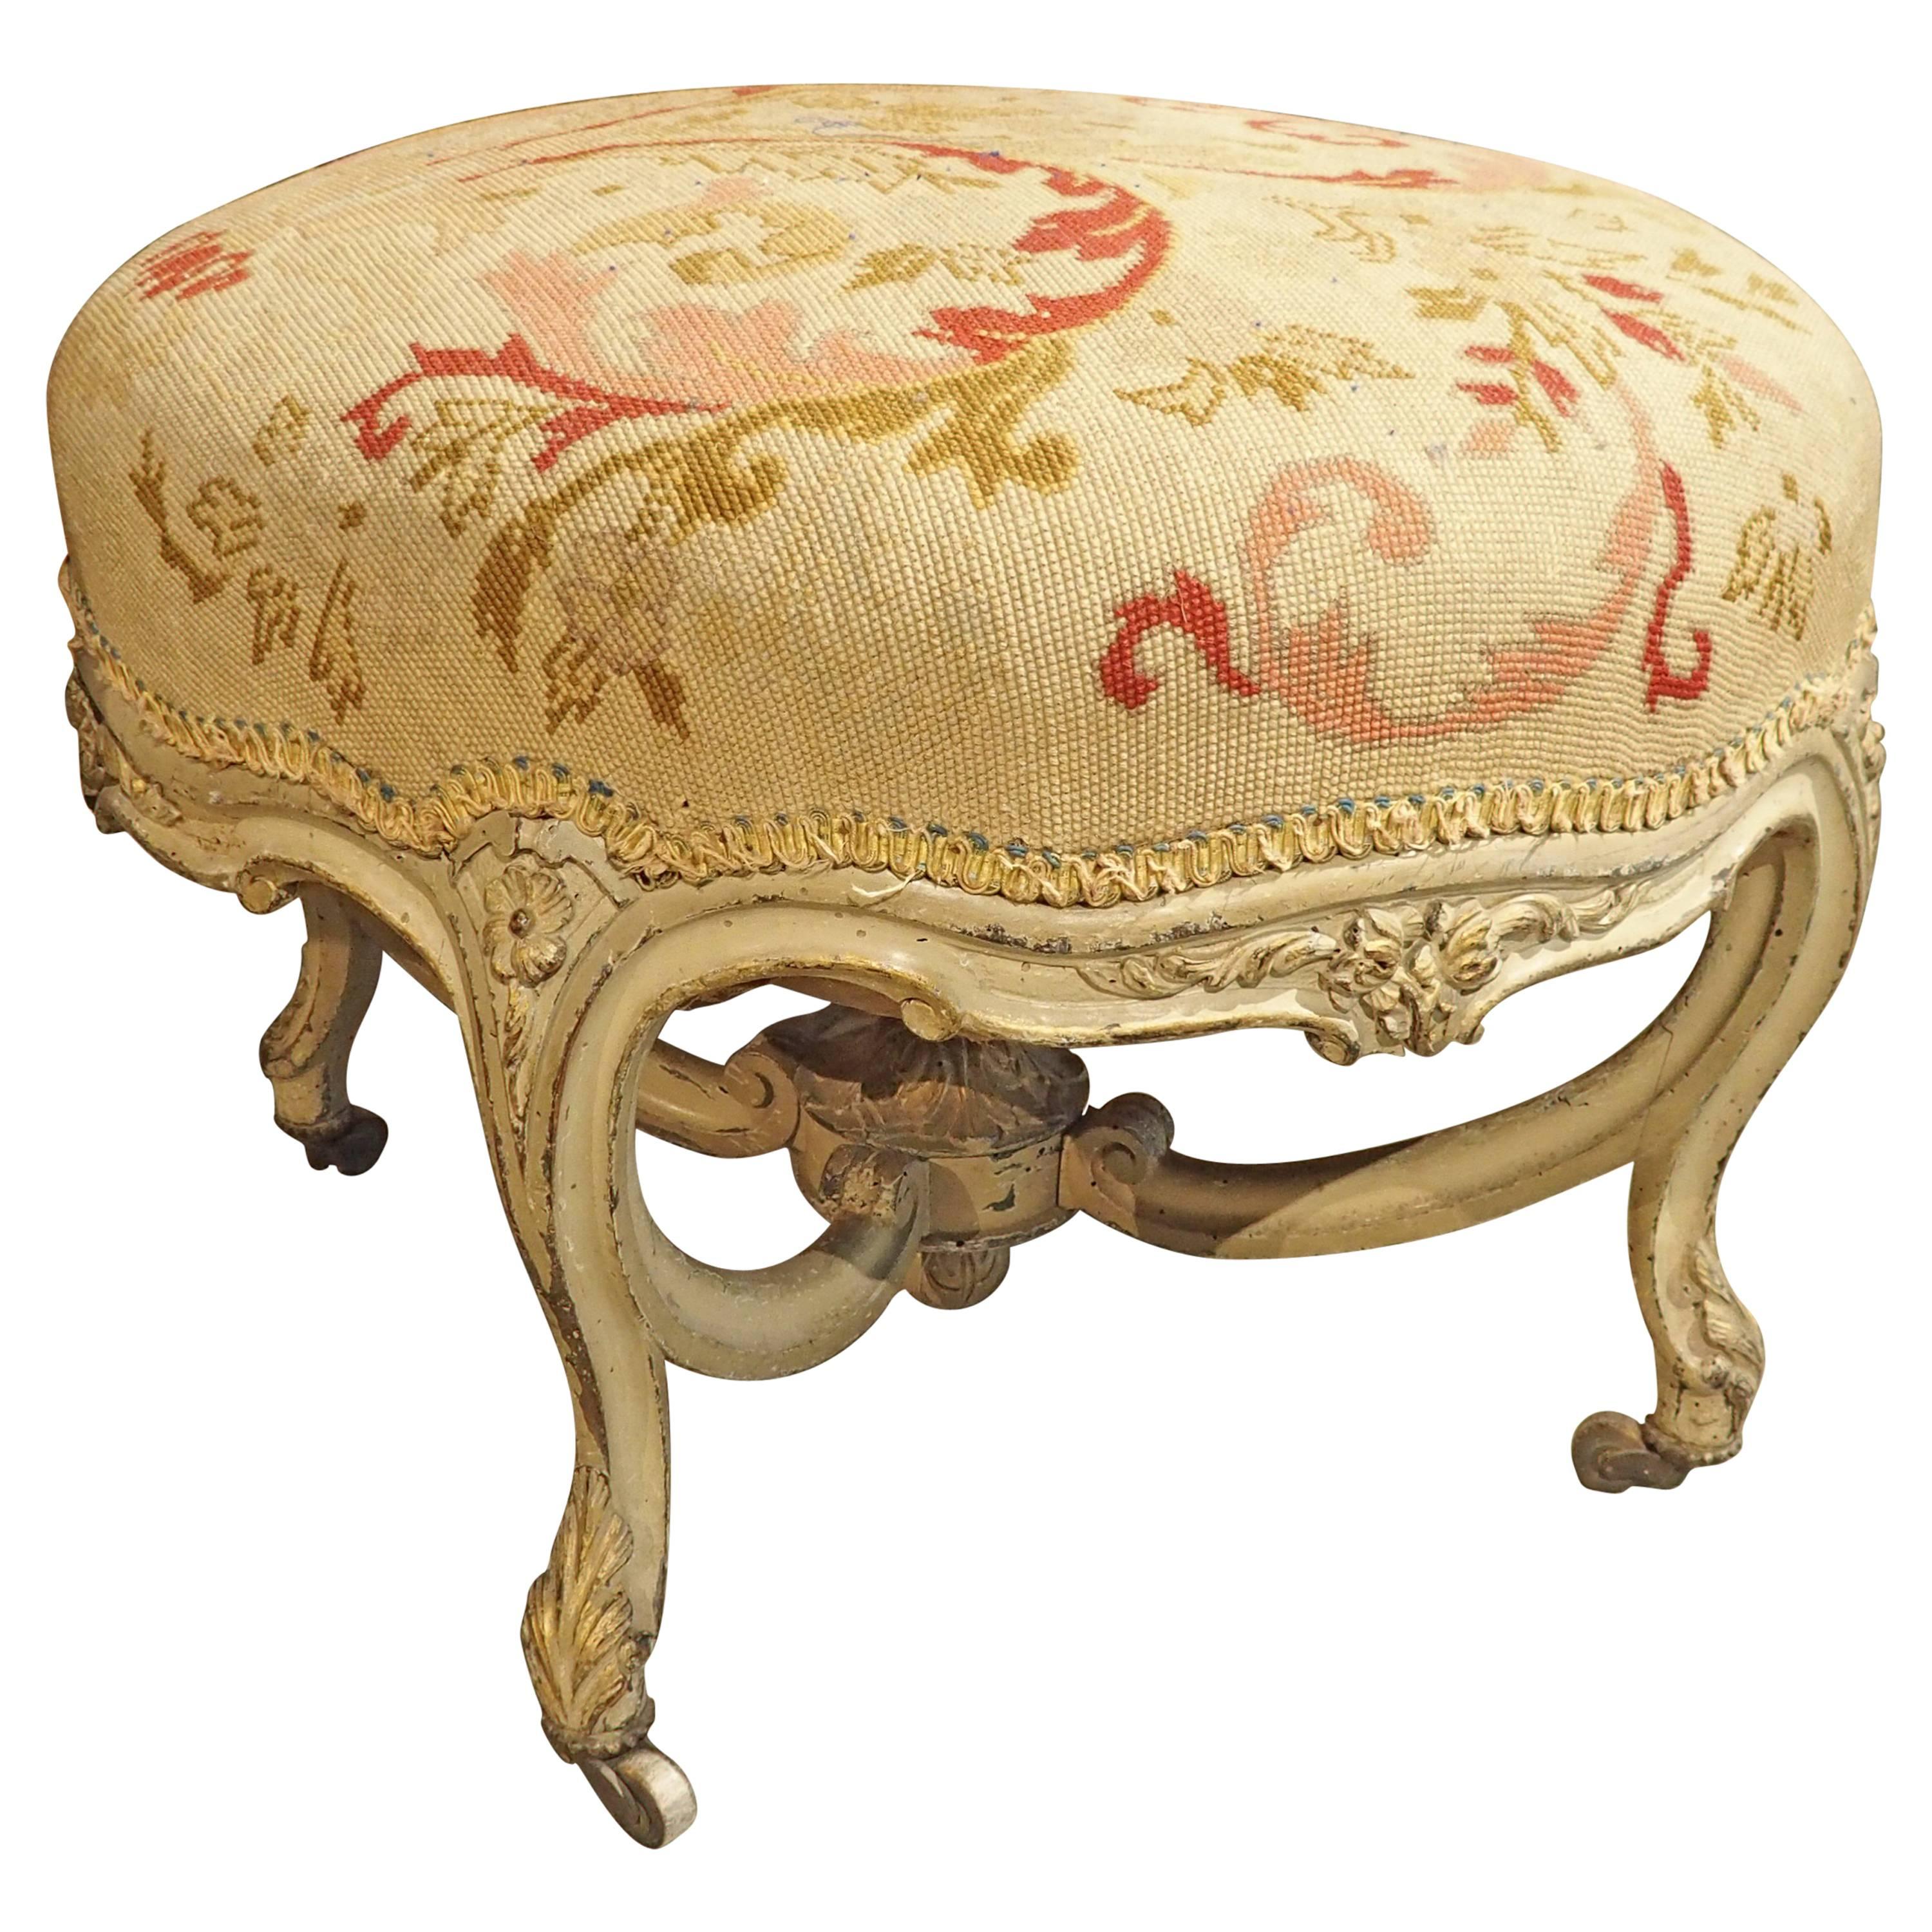 Antique Louis XV Style Needlepoint Stool from France